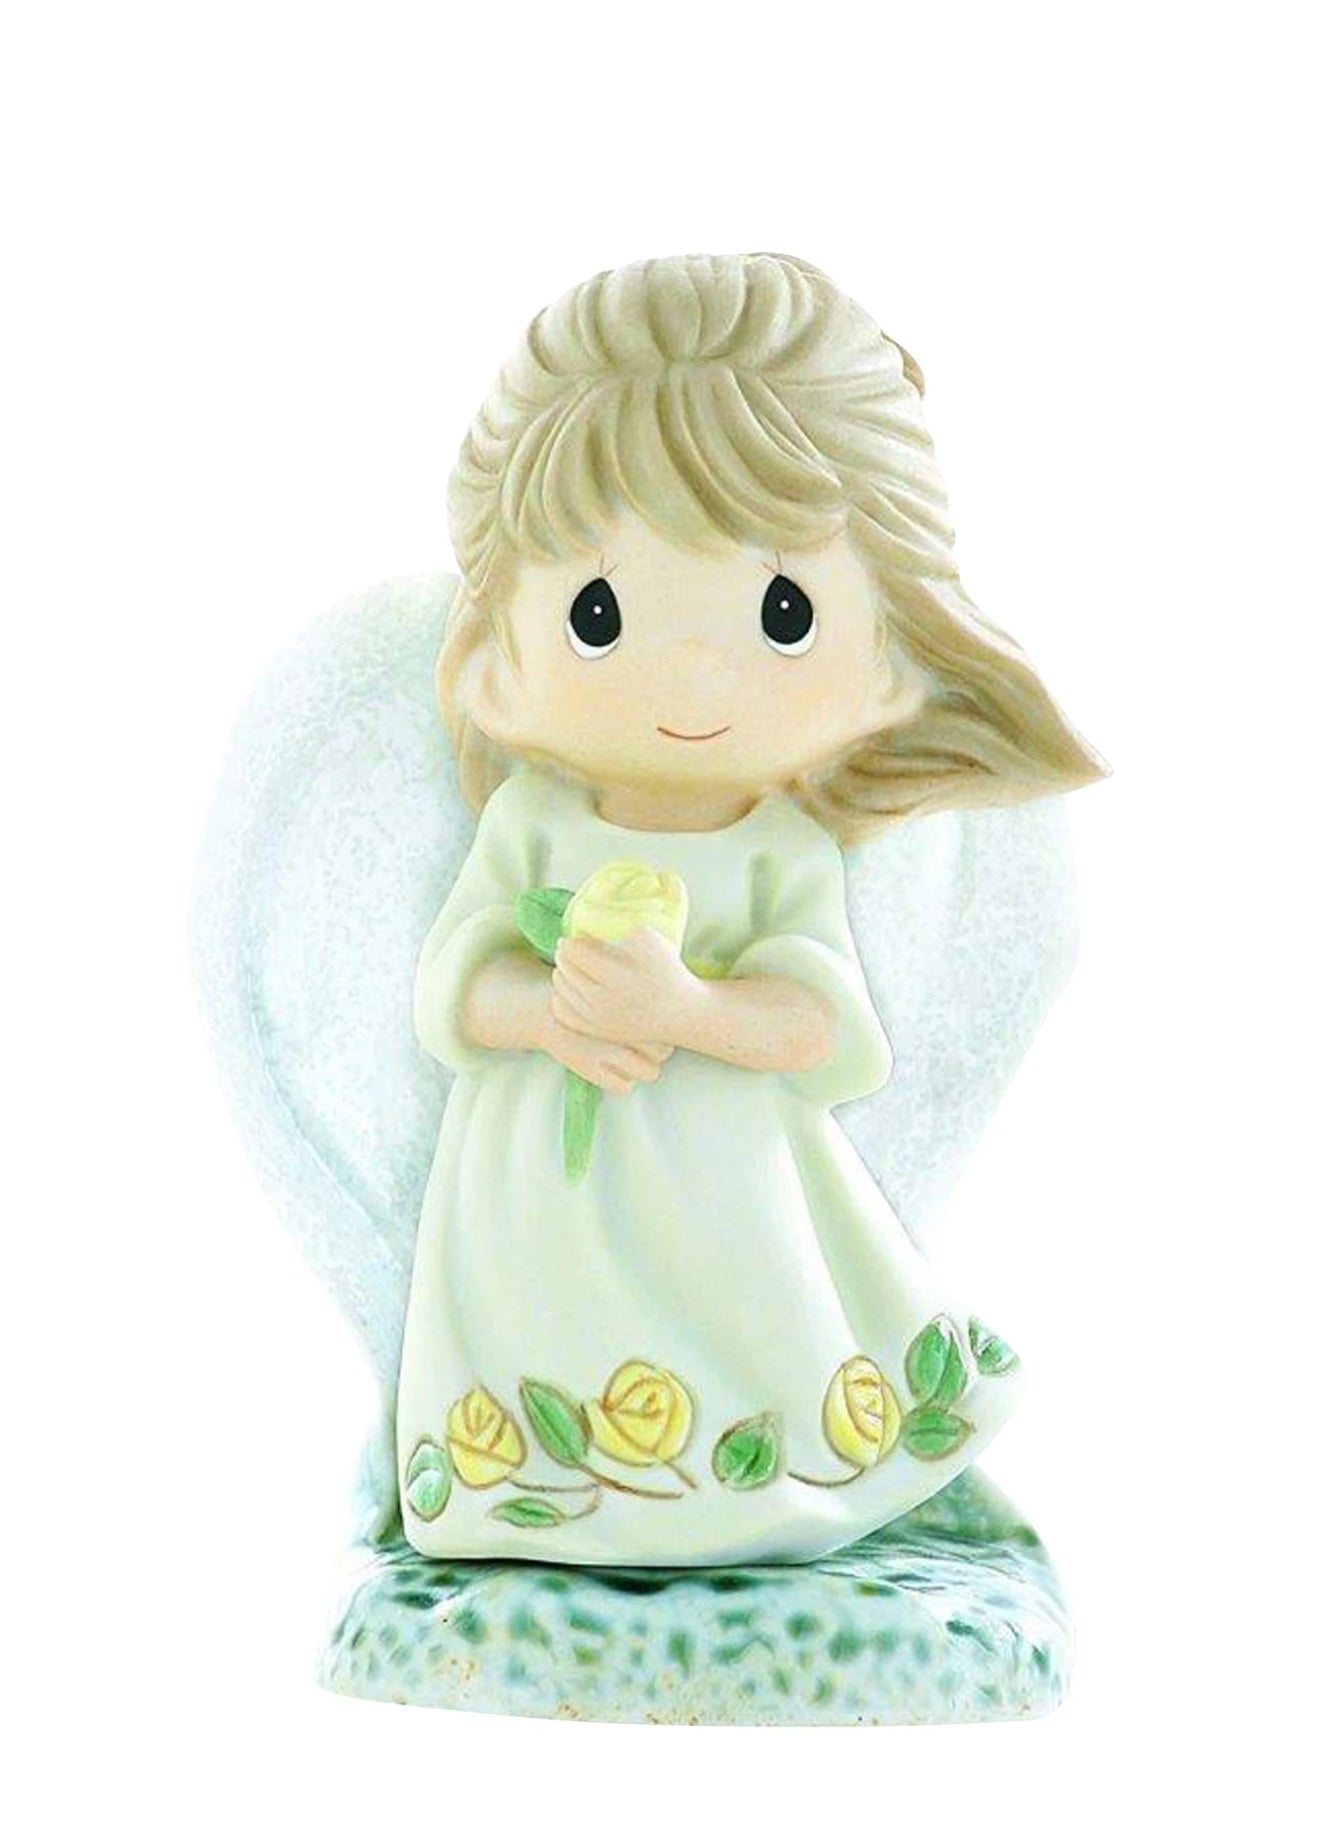 Your Friendship Brings Light To My Life - Precious Moment Figurine